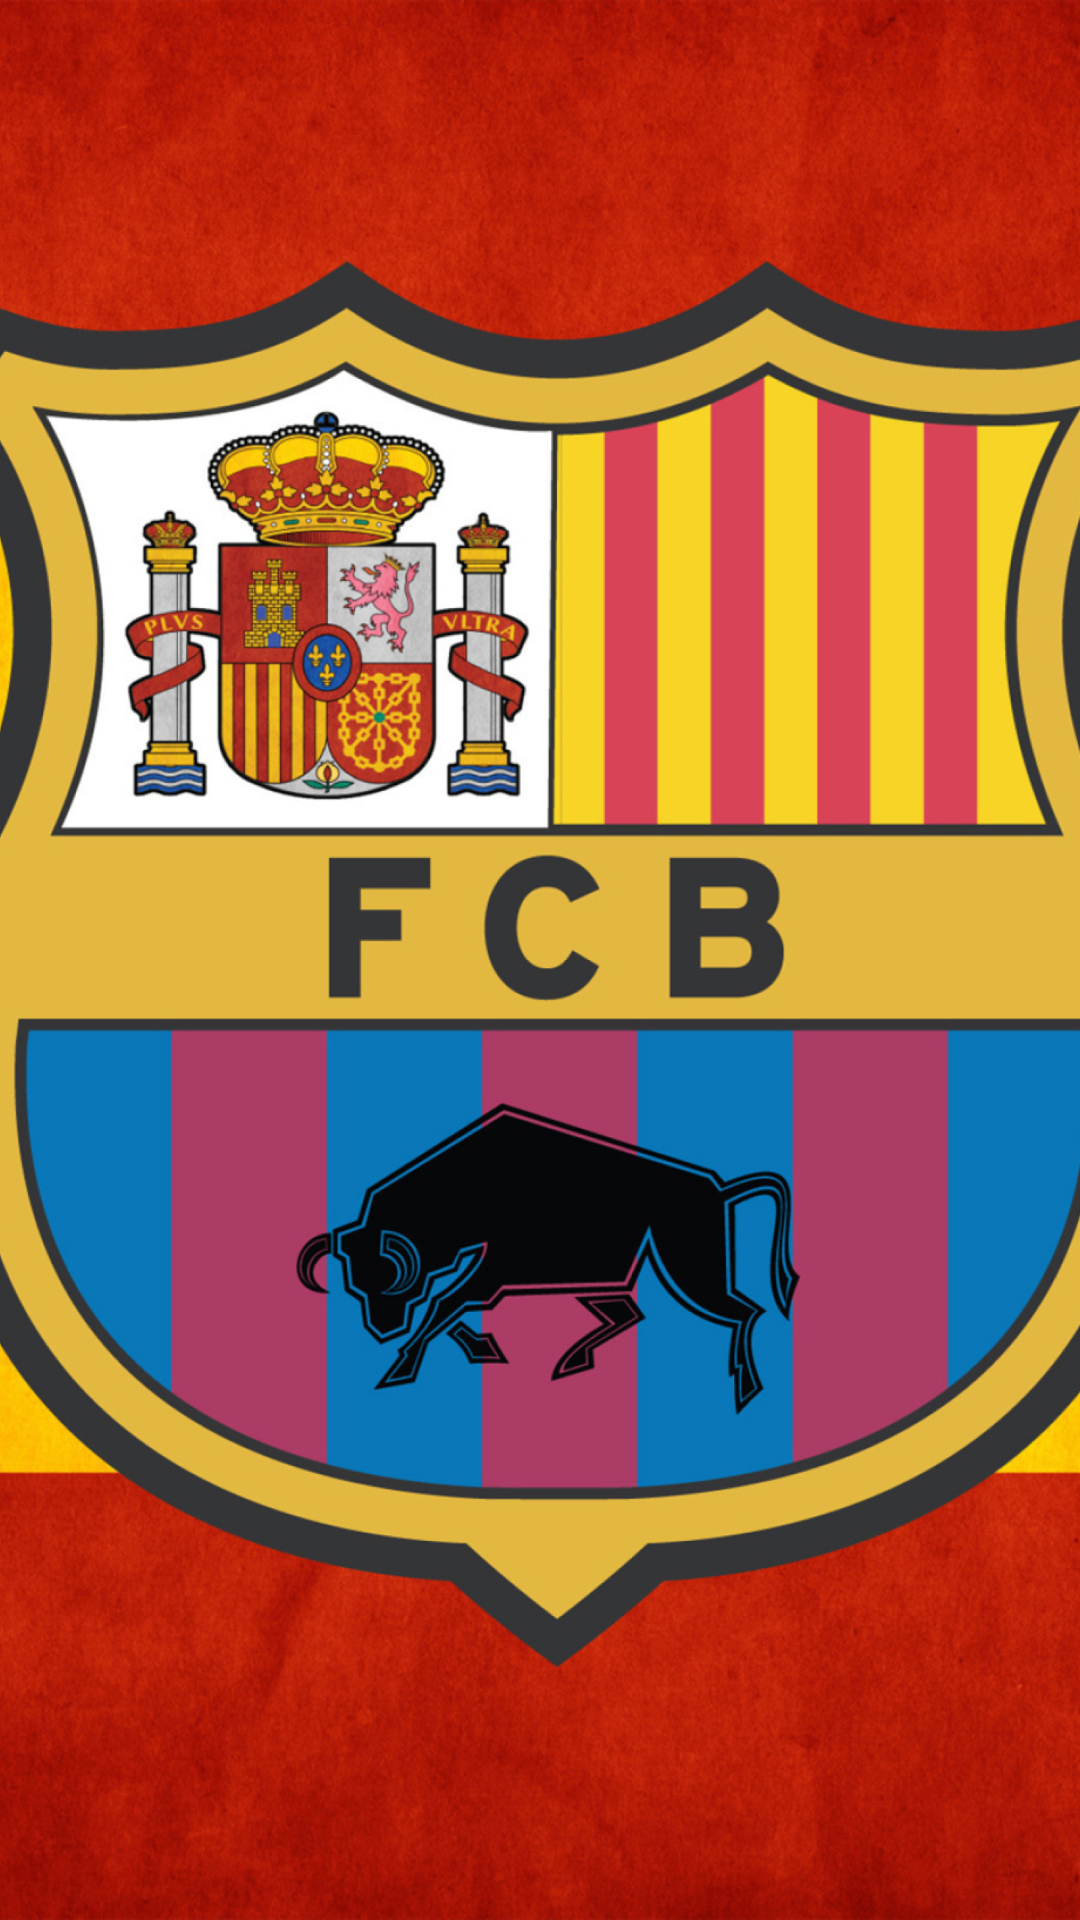 Fc barcelona hd wallpapers for iphone 6 luxury barcelona fc iphone  background full hd barcelona fc